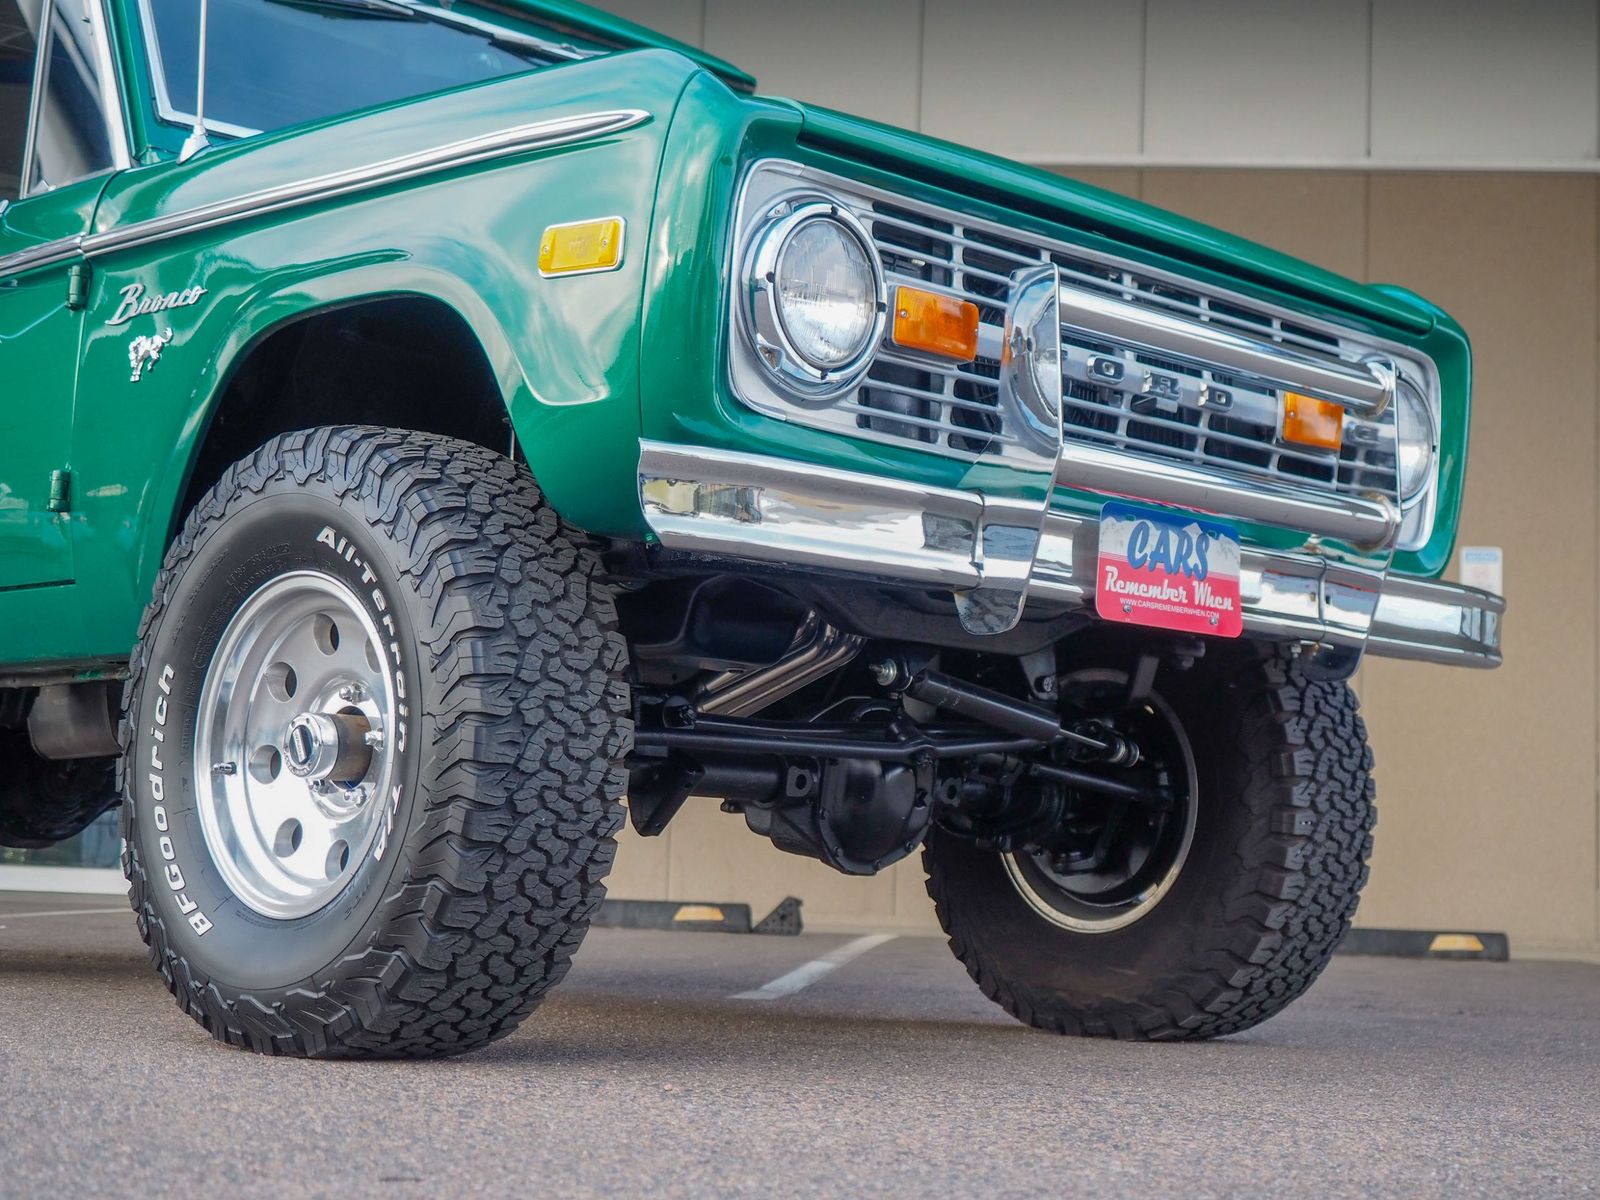 1977 Ford Bronco 5